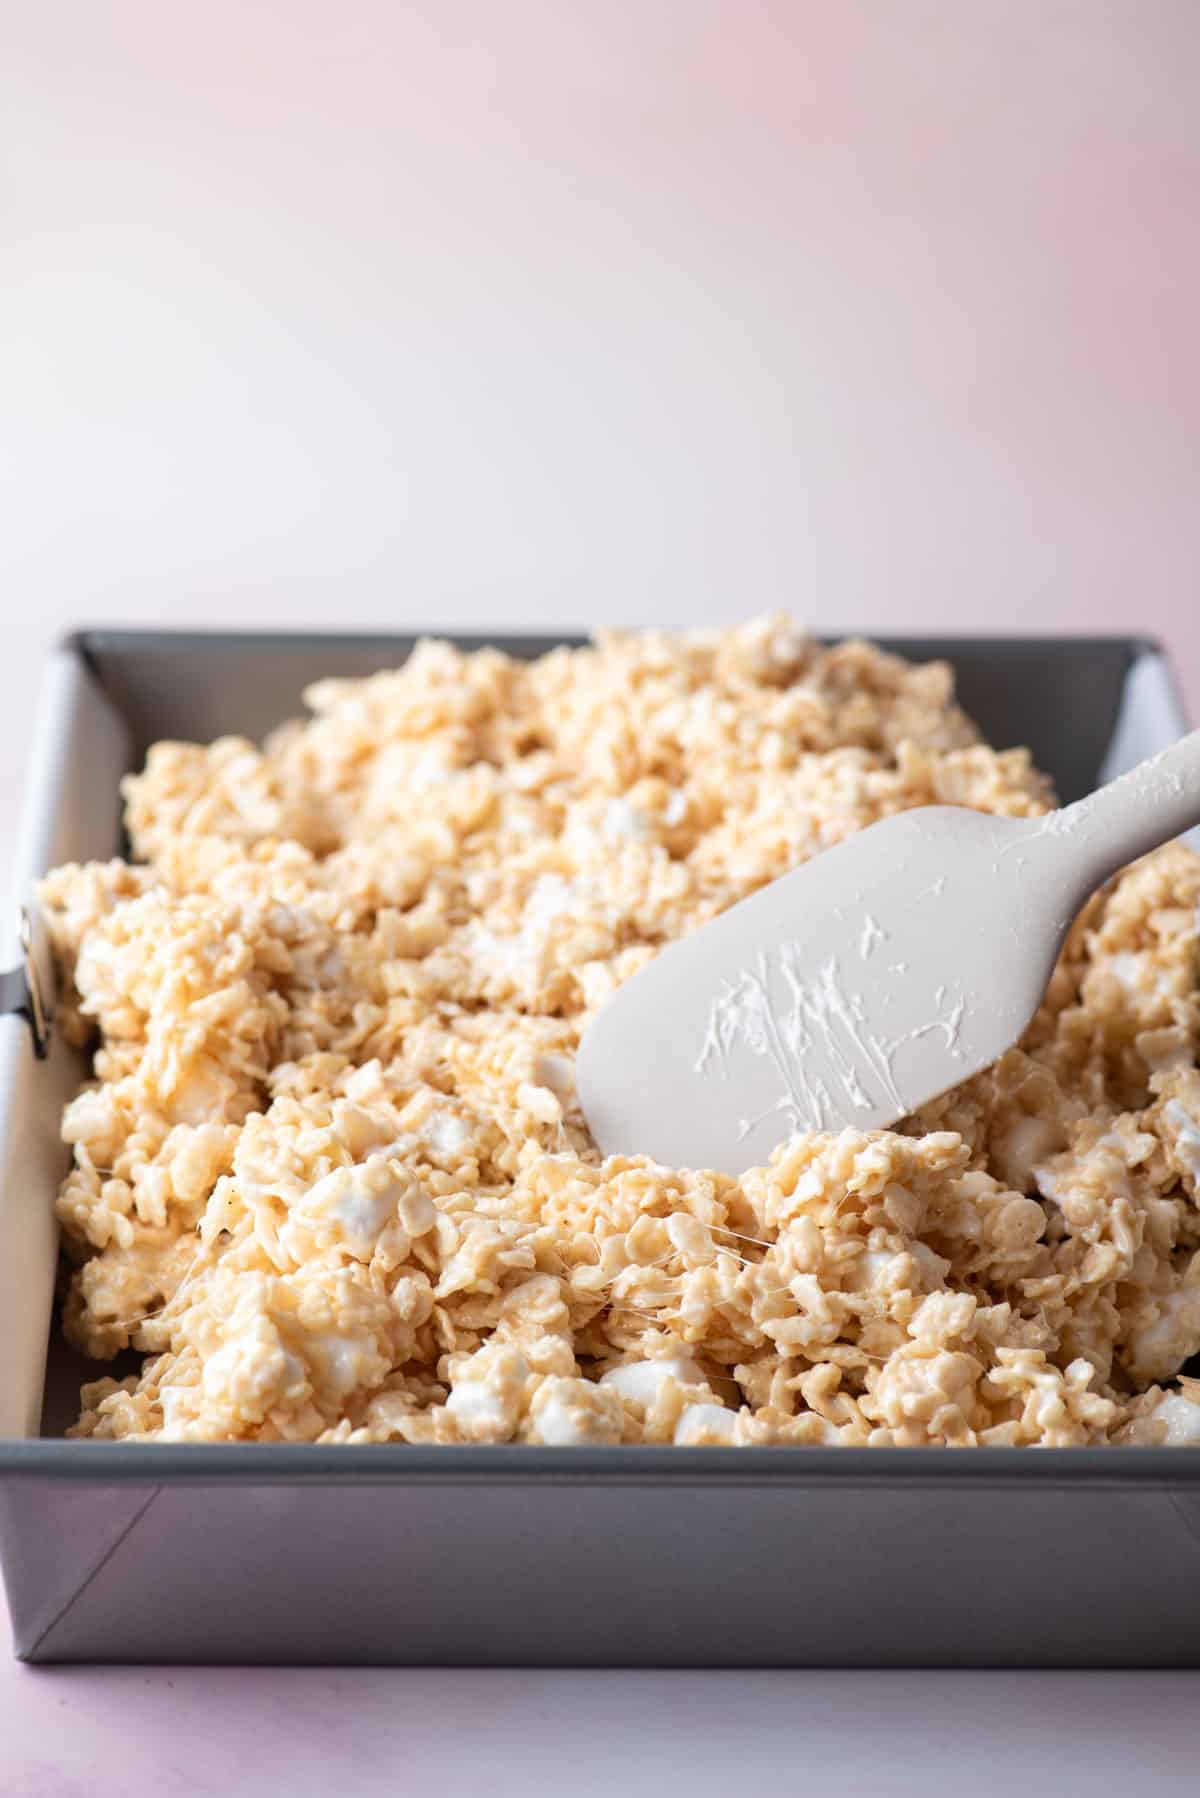 rice krispie treats mixture being gently pressed into a baking pan with a grey spatula